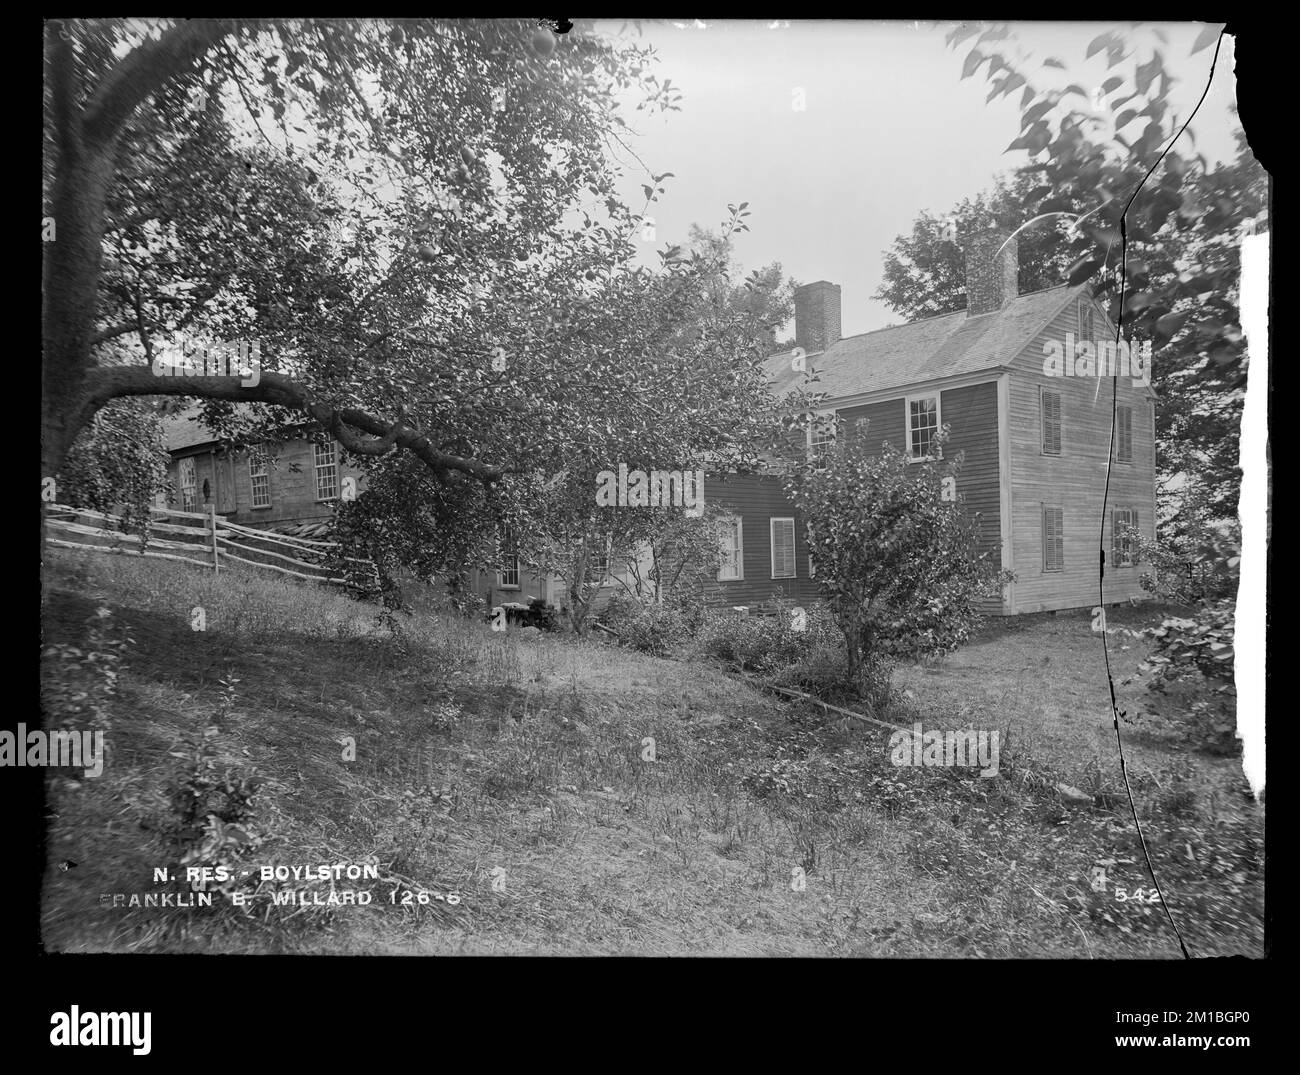 Wachusett Reservoir, house of Franklin B. Willard, from the northwest, Boylston, Mass., Sep. 8, 1896 , waterworks, reservoirs water distribution structures, real estate Stock Photo